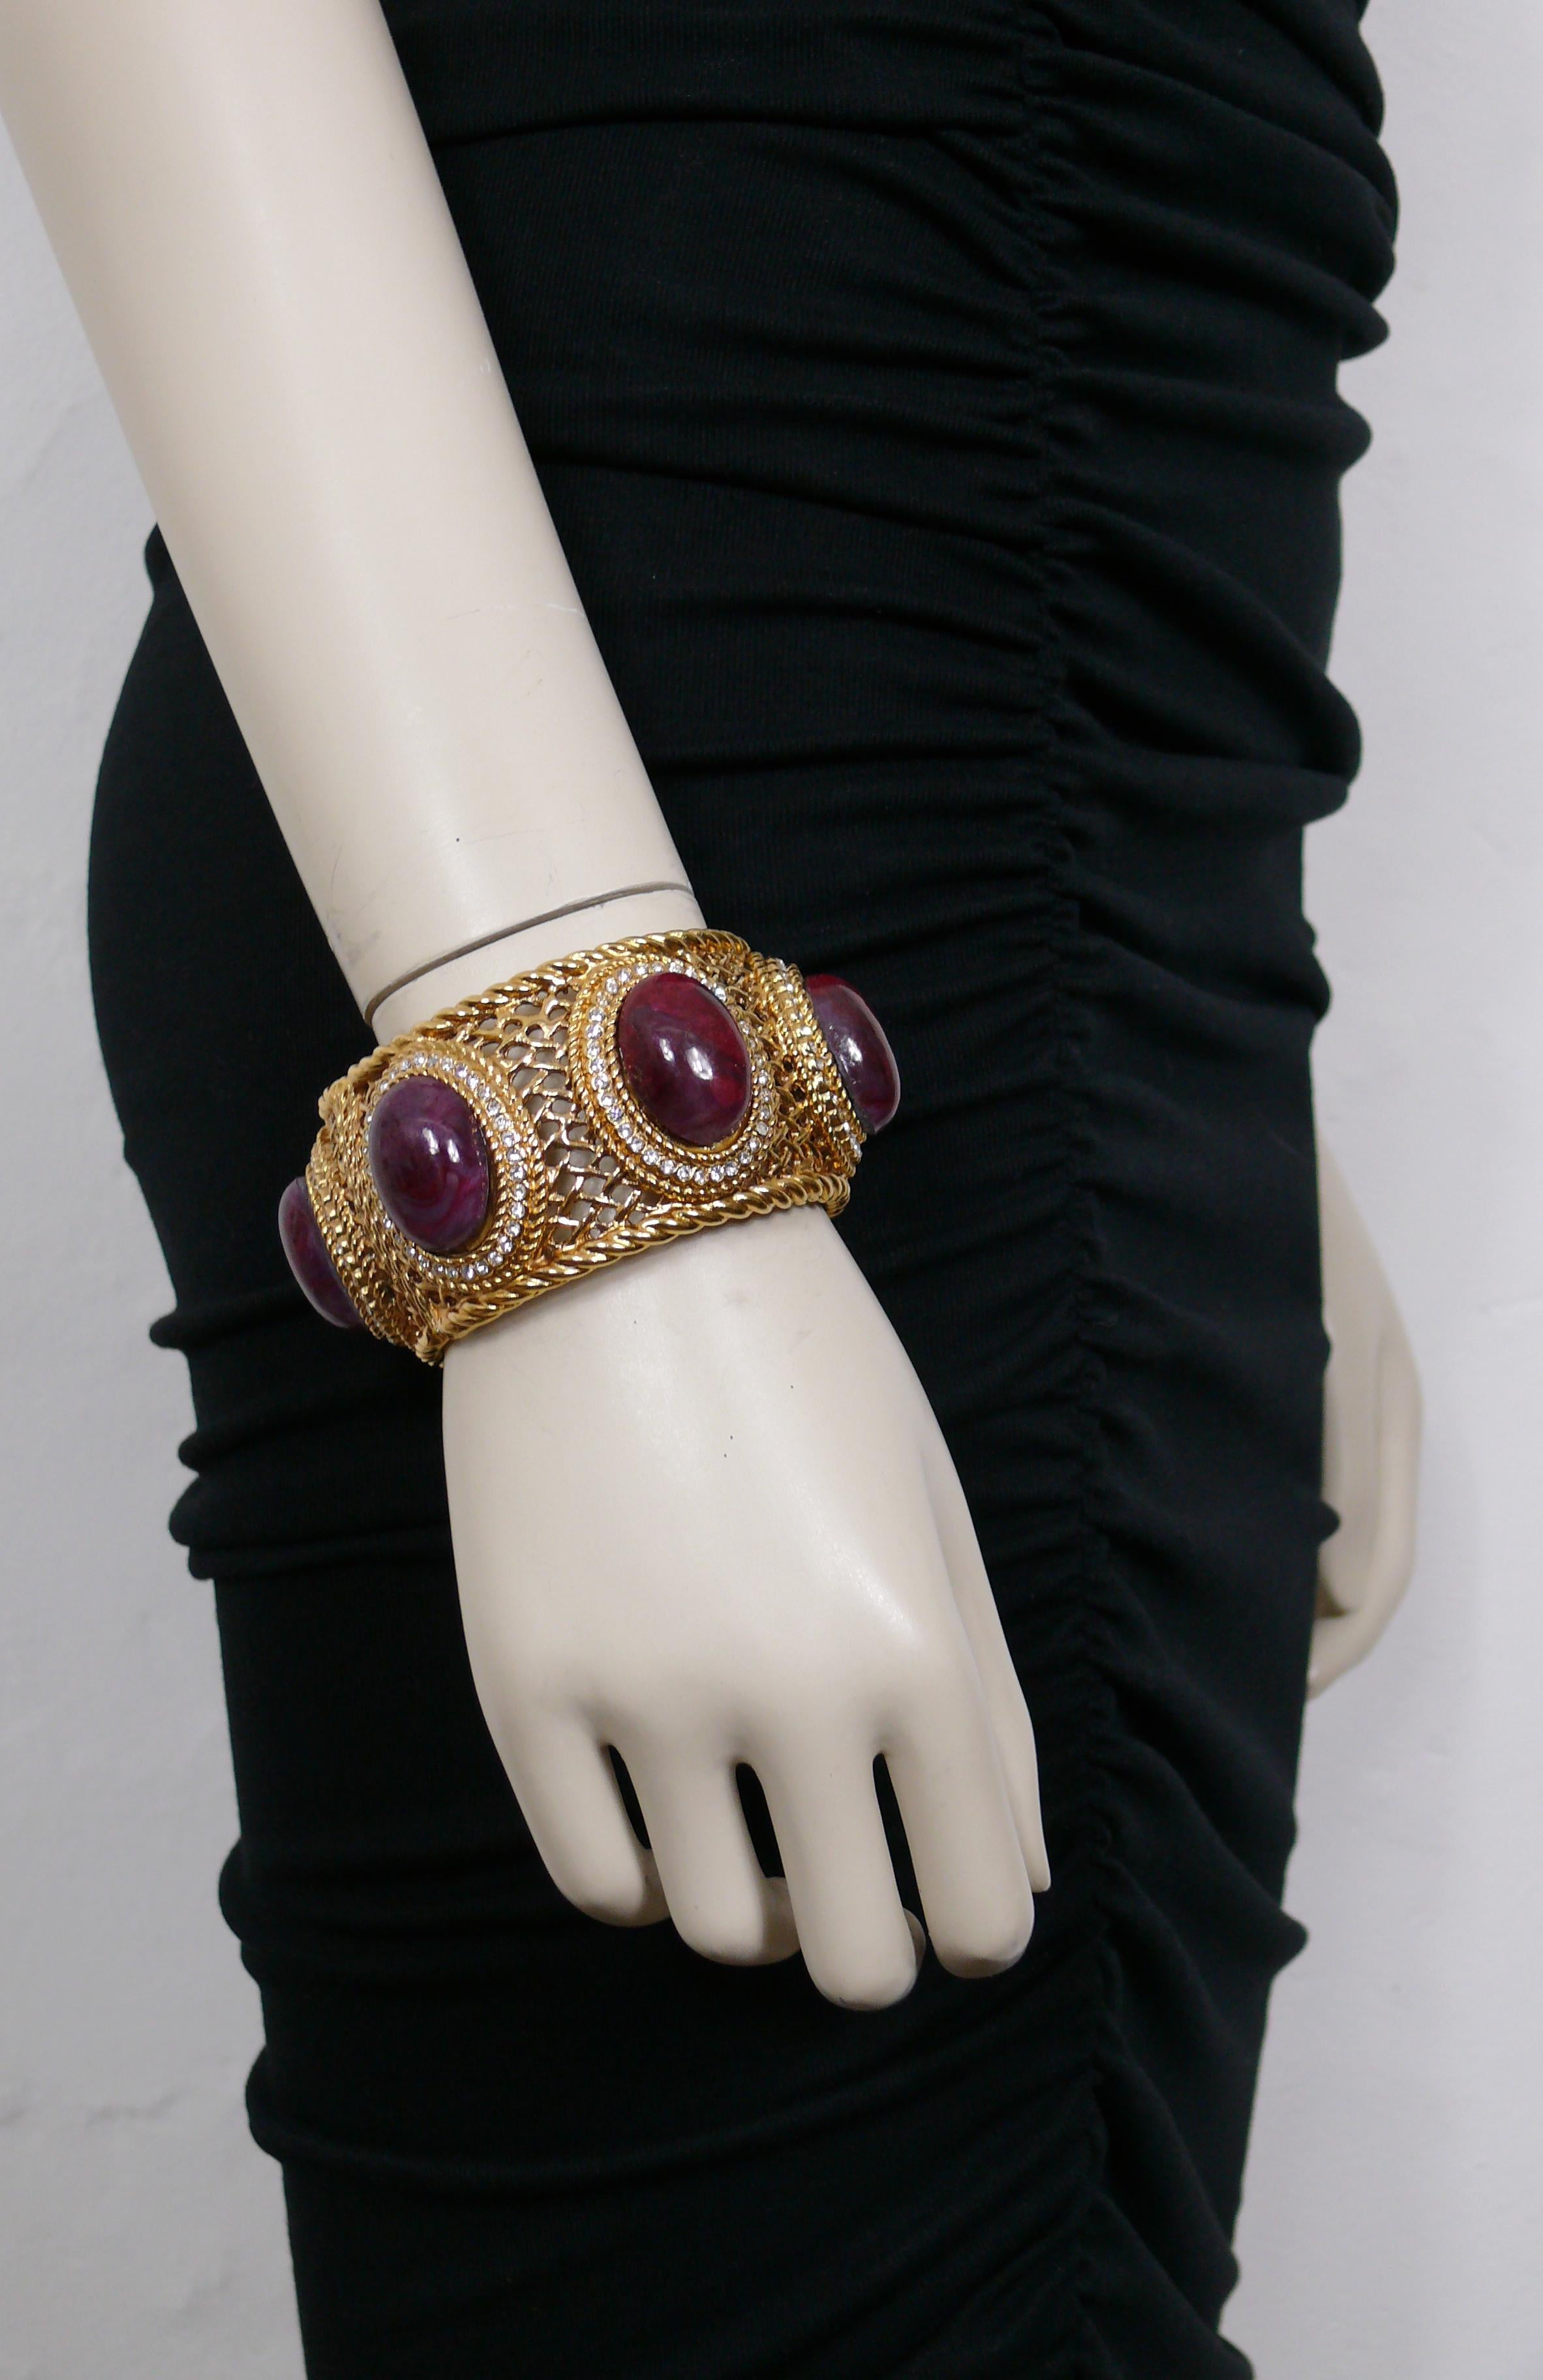 CHRISTIAN DIOR gorgeous massive gold toned rigid cuff bracelet featuring a latticework design, medallions embellished with clear crystals and red marbled oval glass cabochons simulating hard stones.

GIANFRANCO FERRE era.

This bracelet closes with